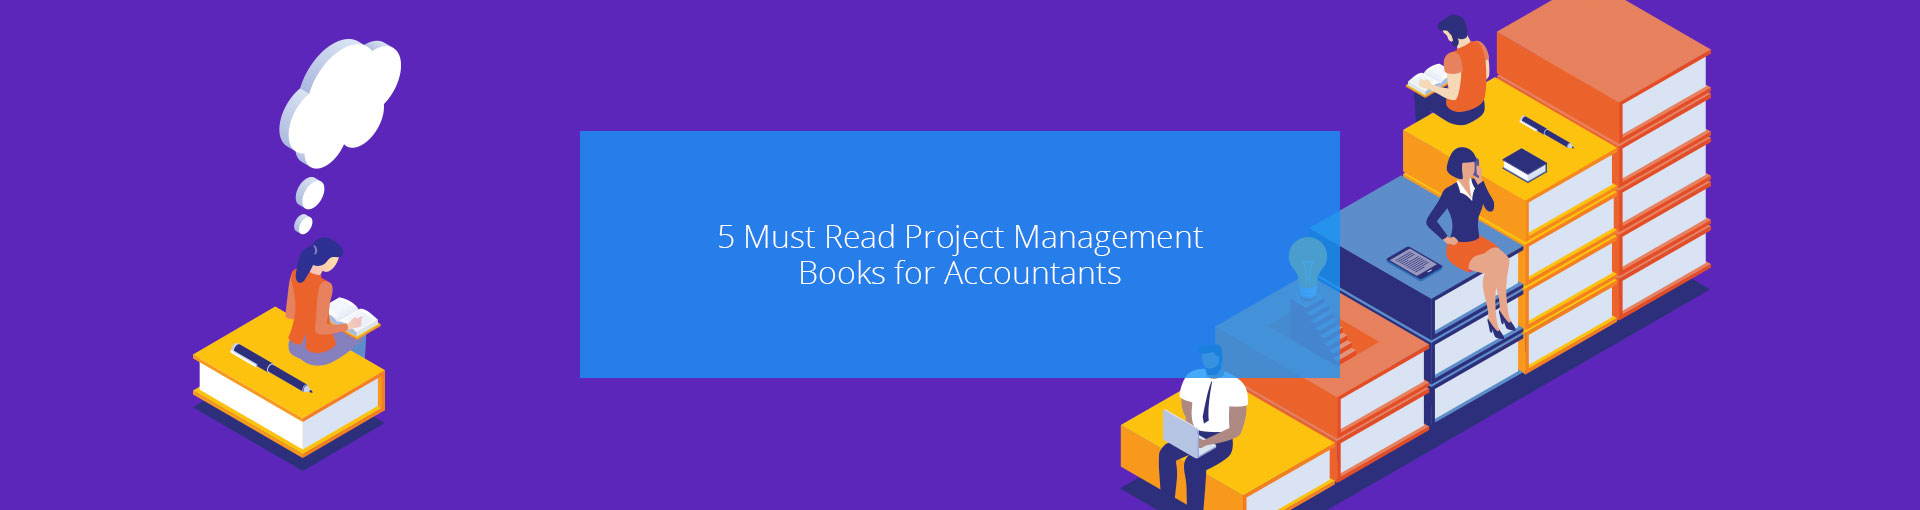 5 Must Read Project Management Books for Accountants Featured Image